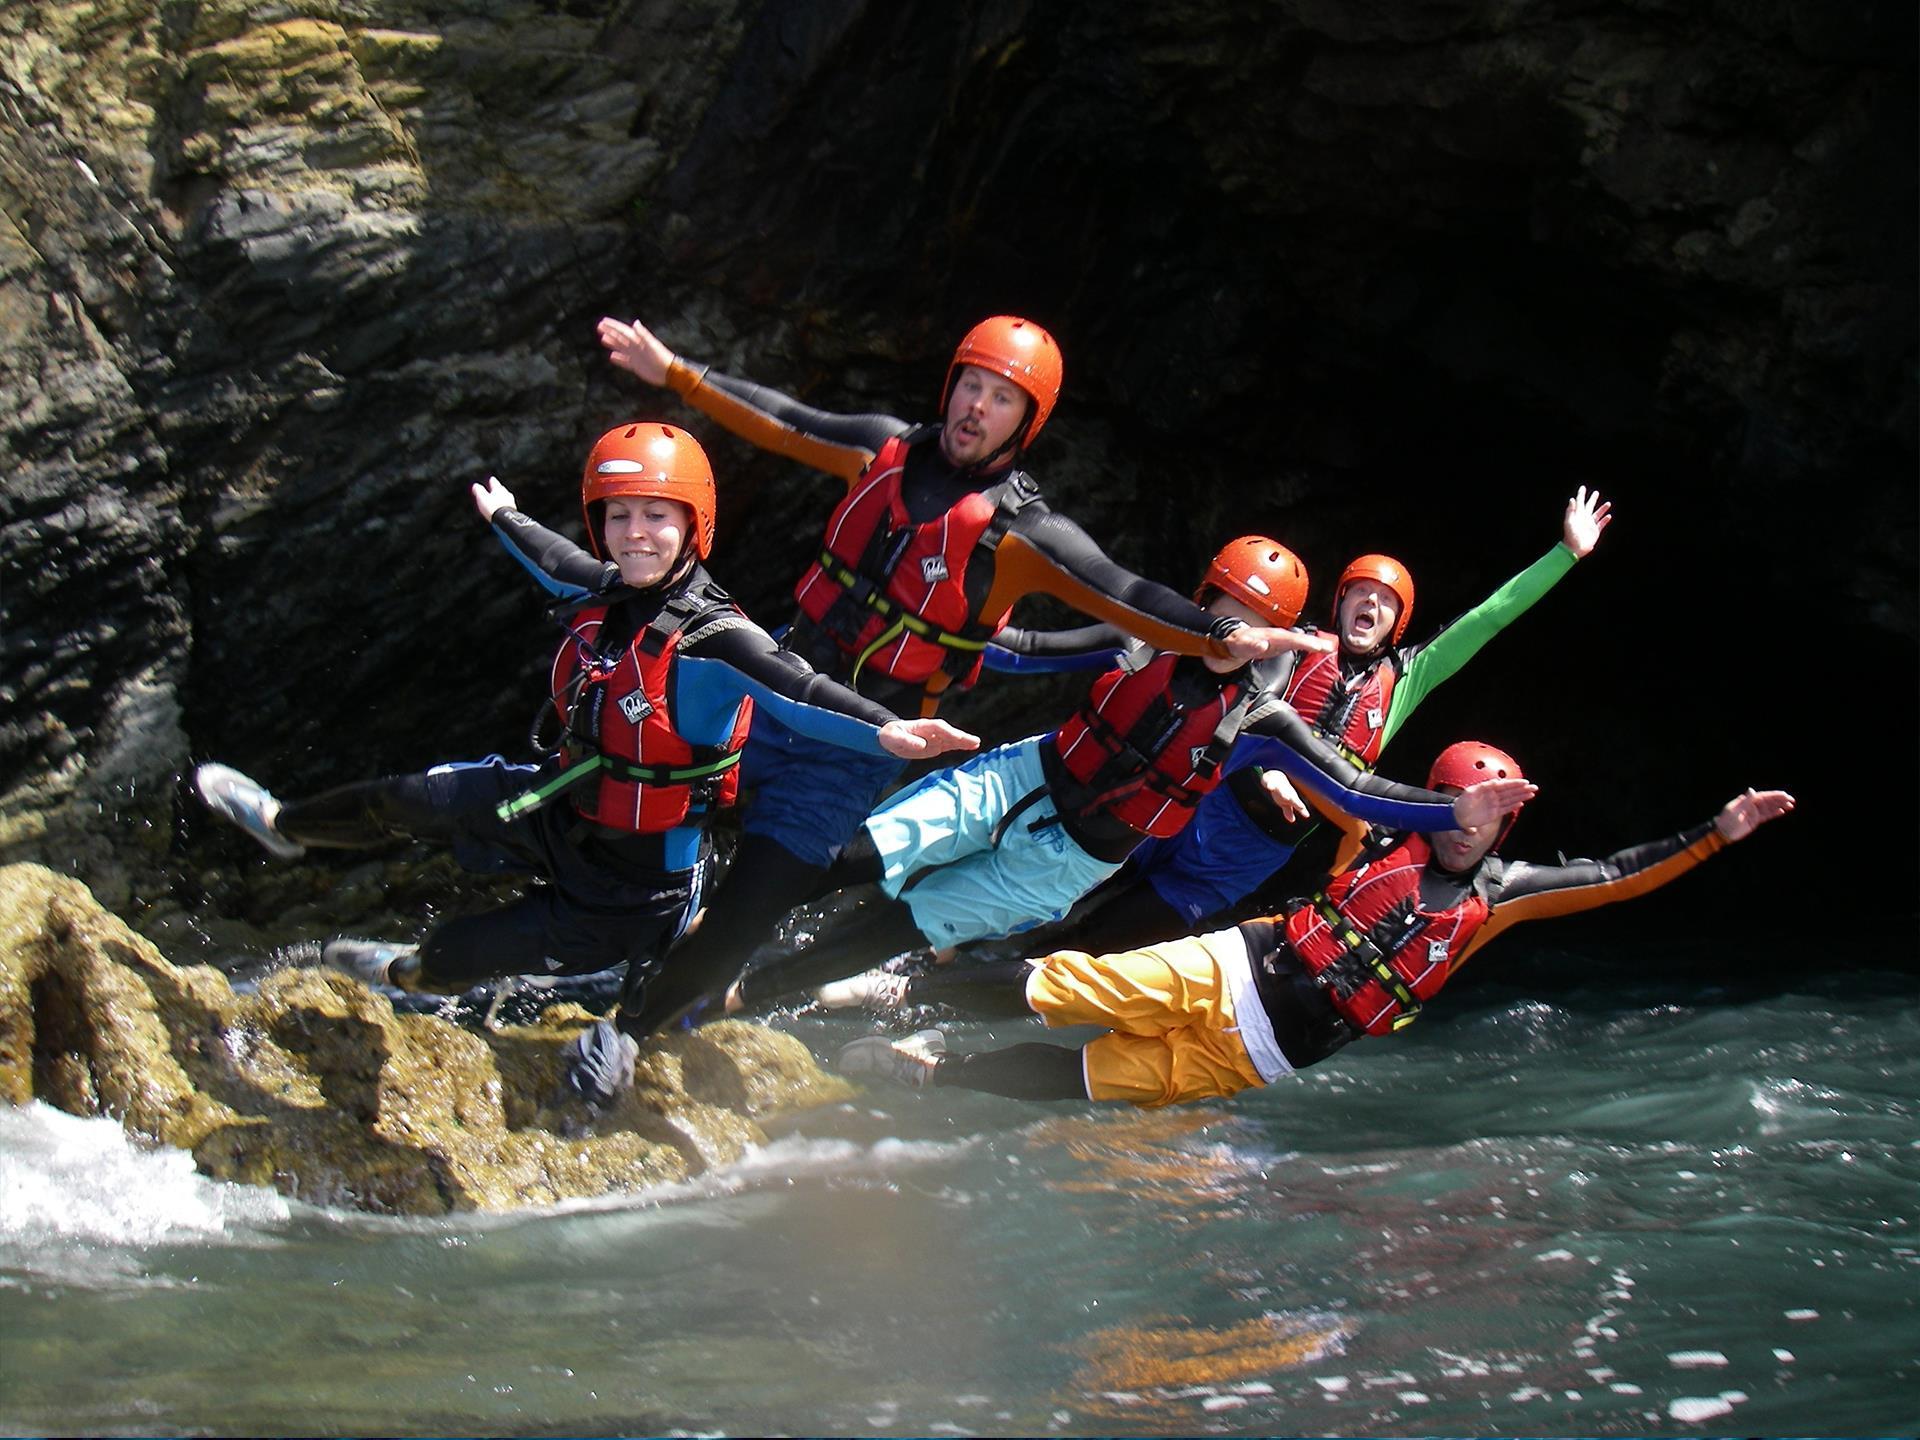 Faling with style Coasteering